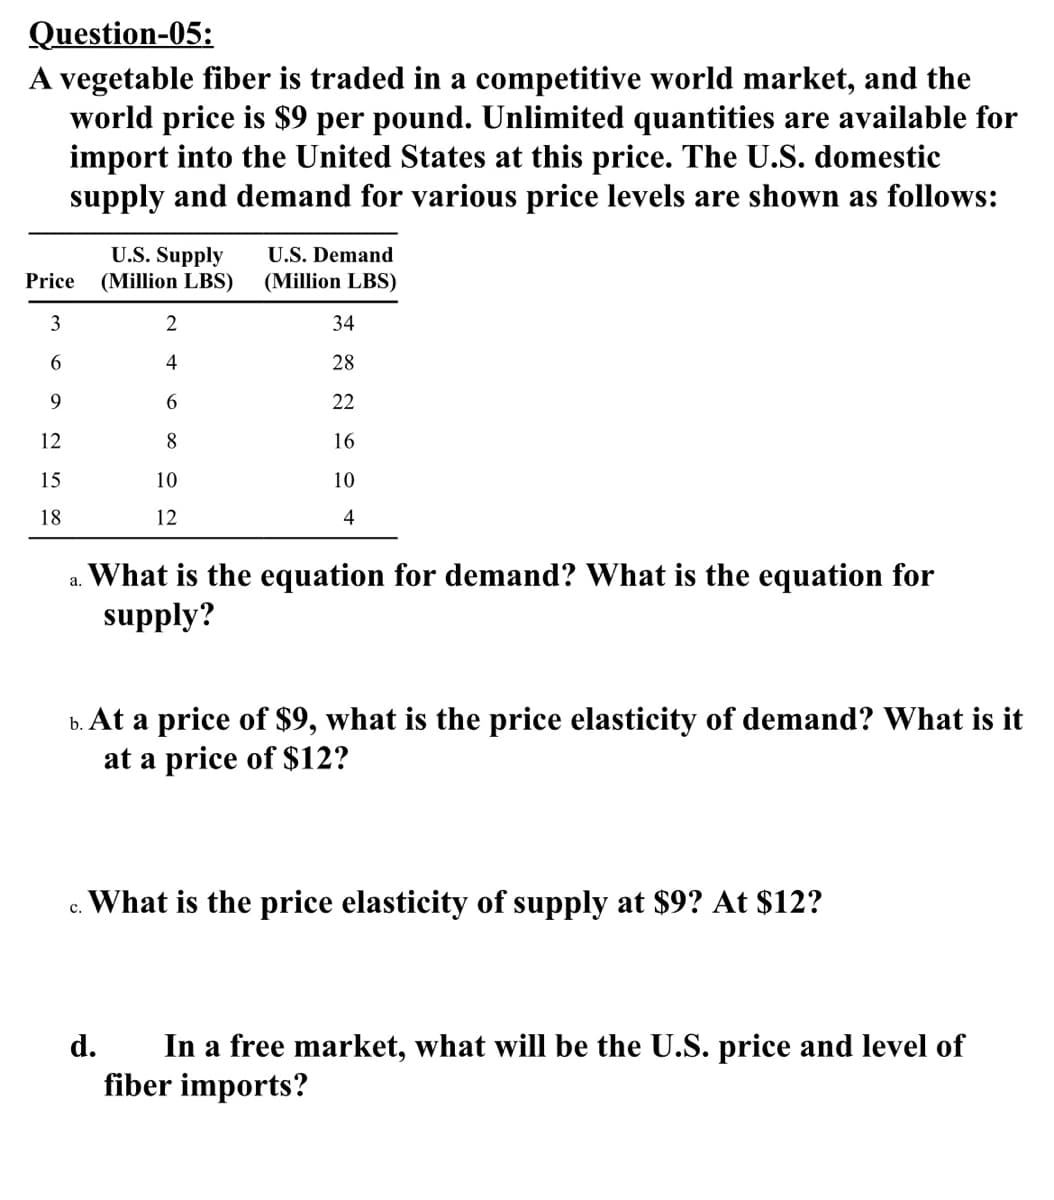 Question-05:
A vegetable fiber is traded in a competitive world market, and the
world price is $9 per pound. Unlimited quantities are available for
import into the United States at this price. The U.S. domestic
supply and demand for various price levels are shown as follows:
U.S. Supply
(Million LBS)
U.S. Demand
Price
(Million LBS)
3
34
6
4
28
9.
22
12
8
16
15
10
10
18
12
4
What is the equation for demand? What is the equation for
supply?
а.
b. At a price of $9, what is the price elasticity of demand? What is it
at a price of $12?
What is the price elasticity of supply at $9? At $12?
c.
In a free market, what will be the U.S. price and level of
fiber imports?
d.
